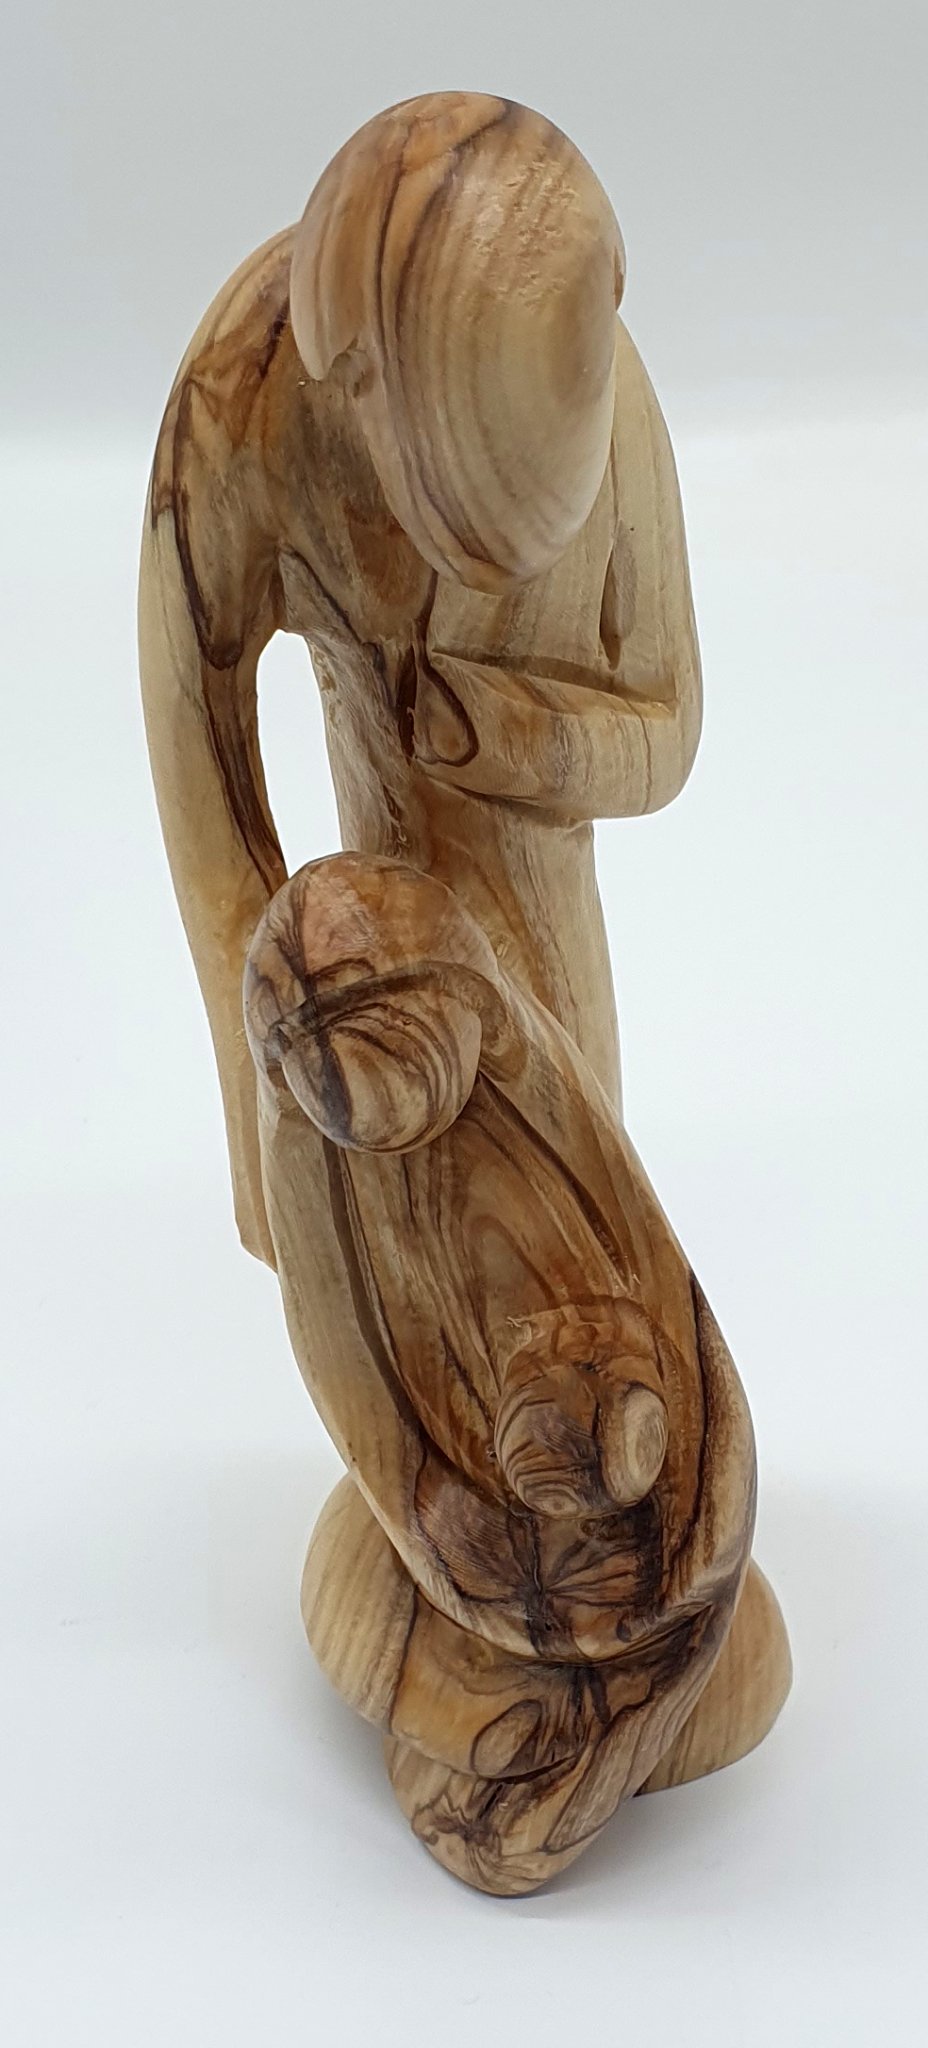 Handcrafted Olive Wood Holy Family Statue - Bethlehem Souvenir | Nativity Scene Sculpture for Home Decor | Christian Religious Christmas Gift - Zuluf